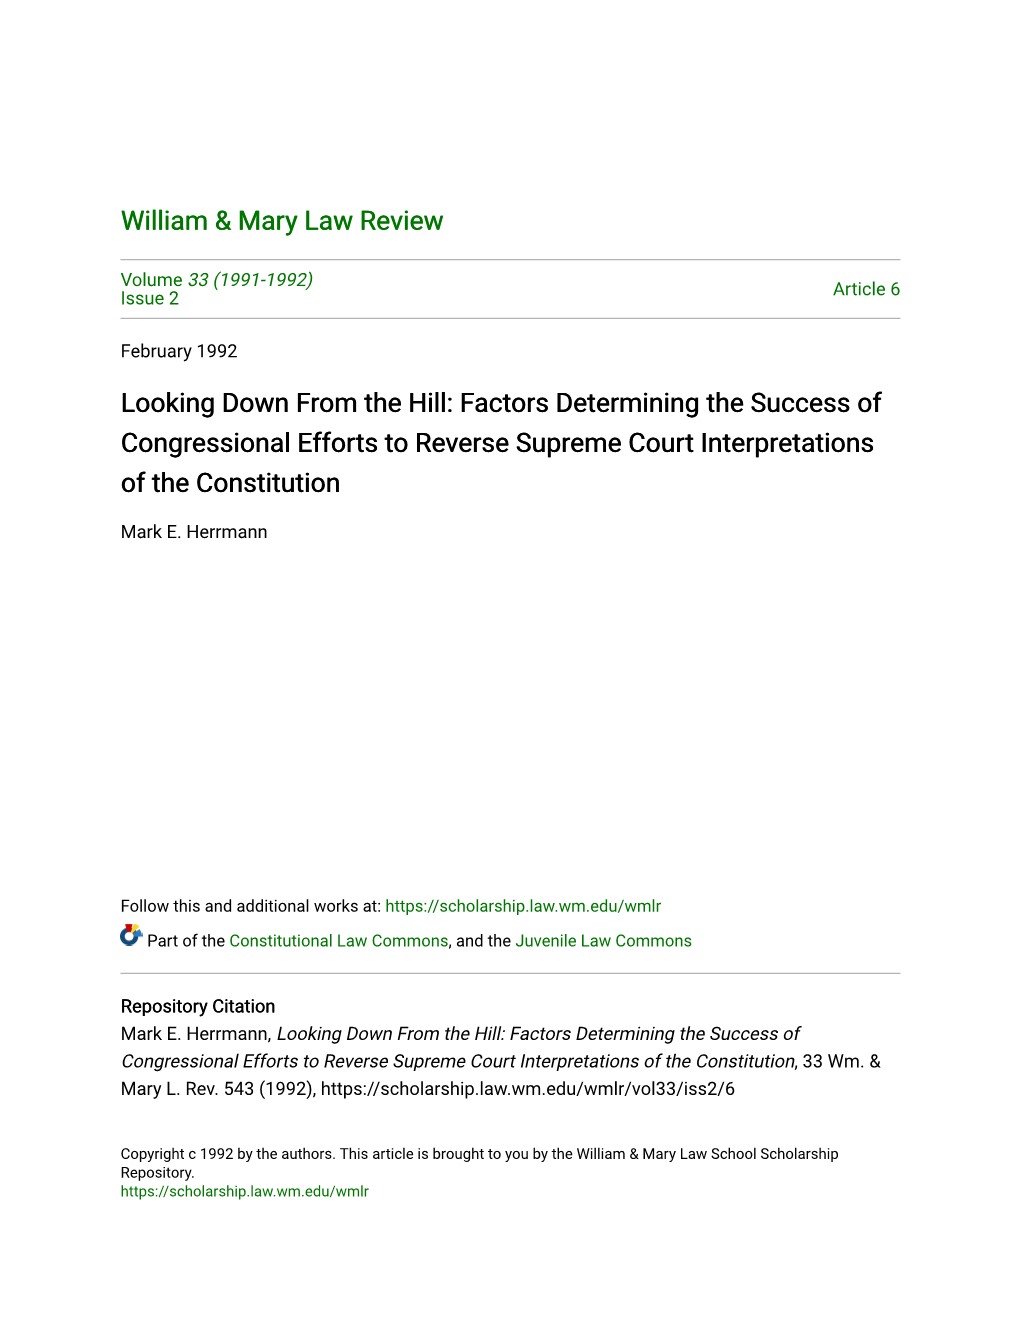 Factors Determining the Success of Congressional Efforts to Reverse Supreme Court Interpretations of the Constitution